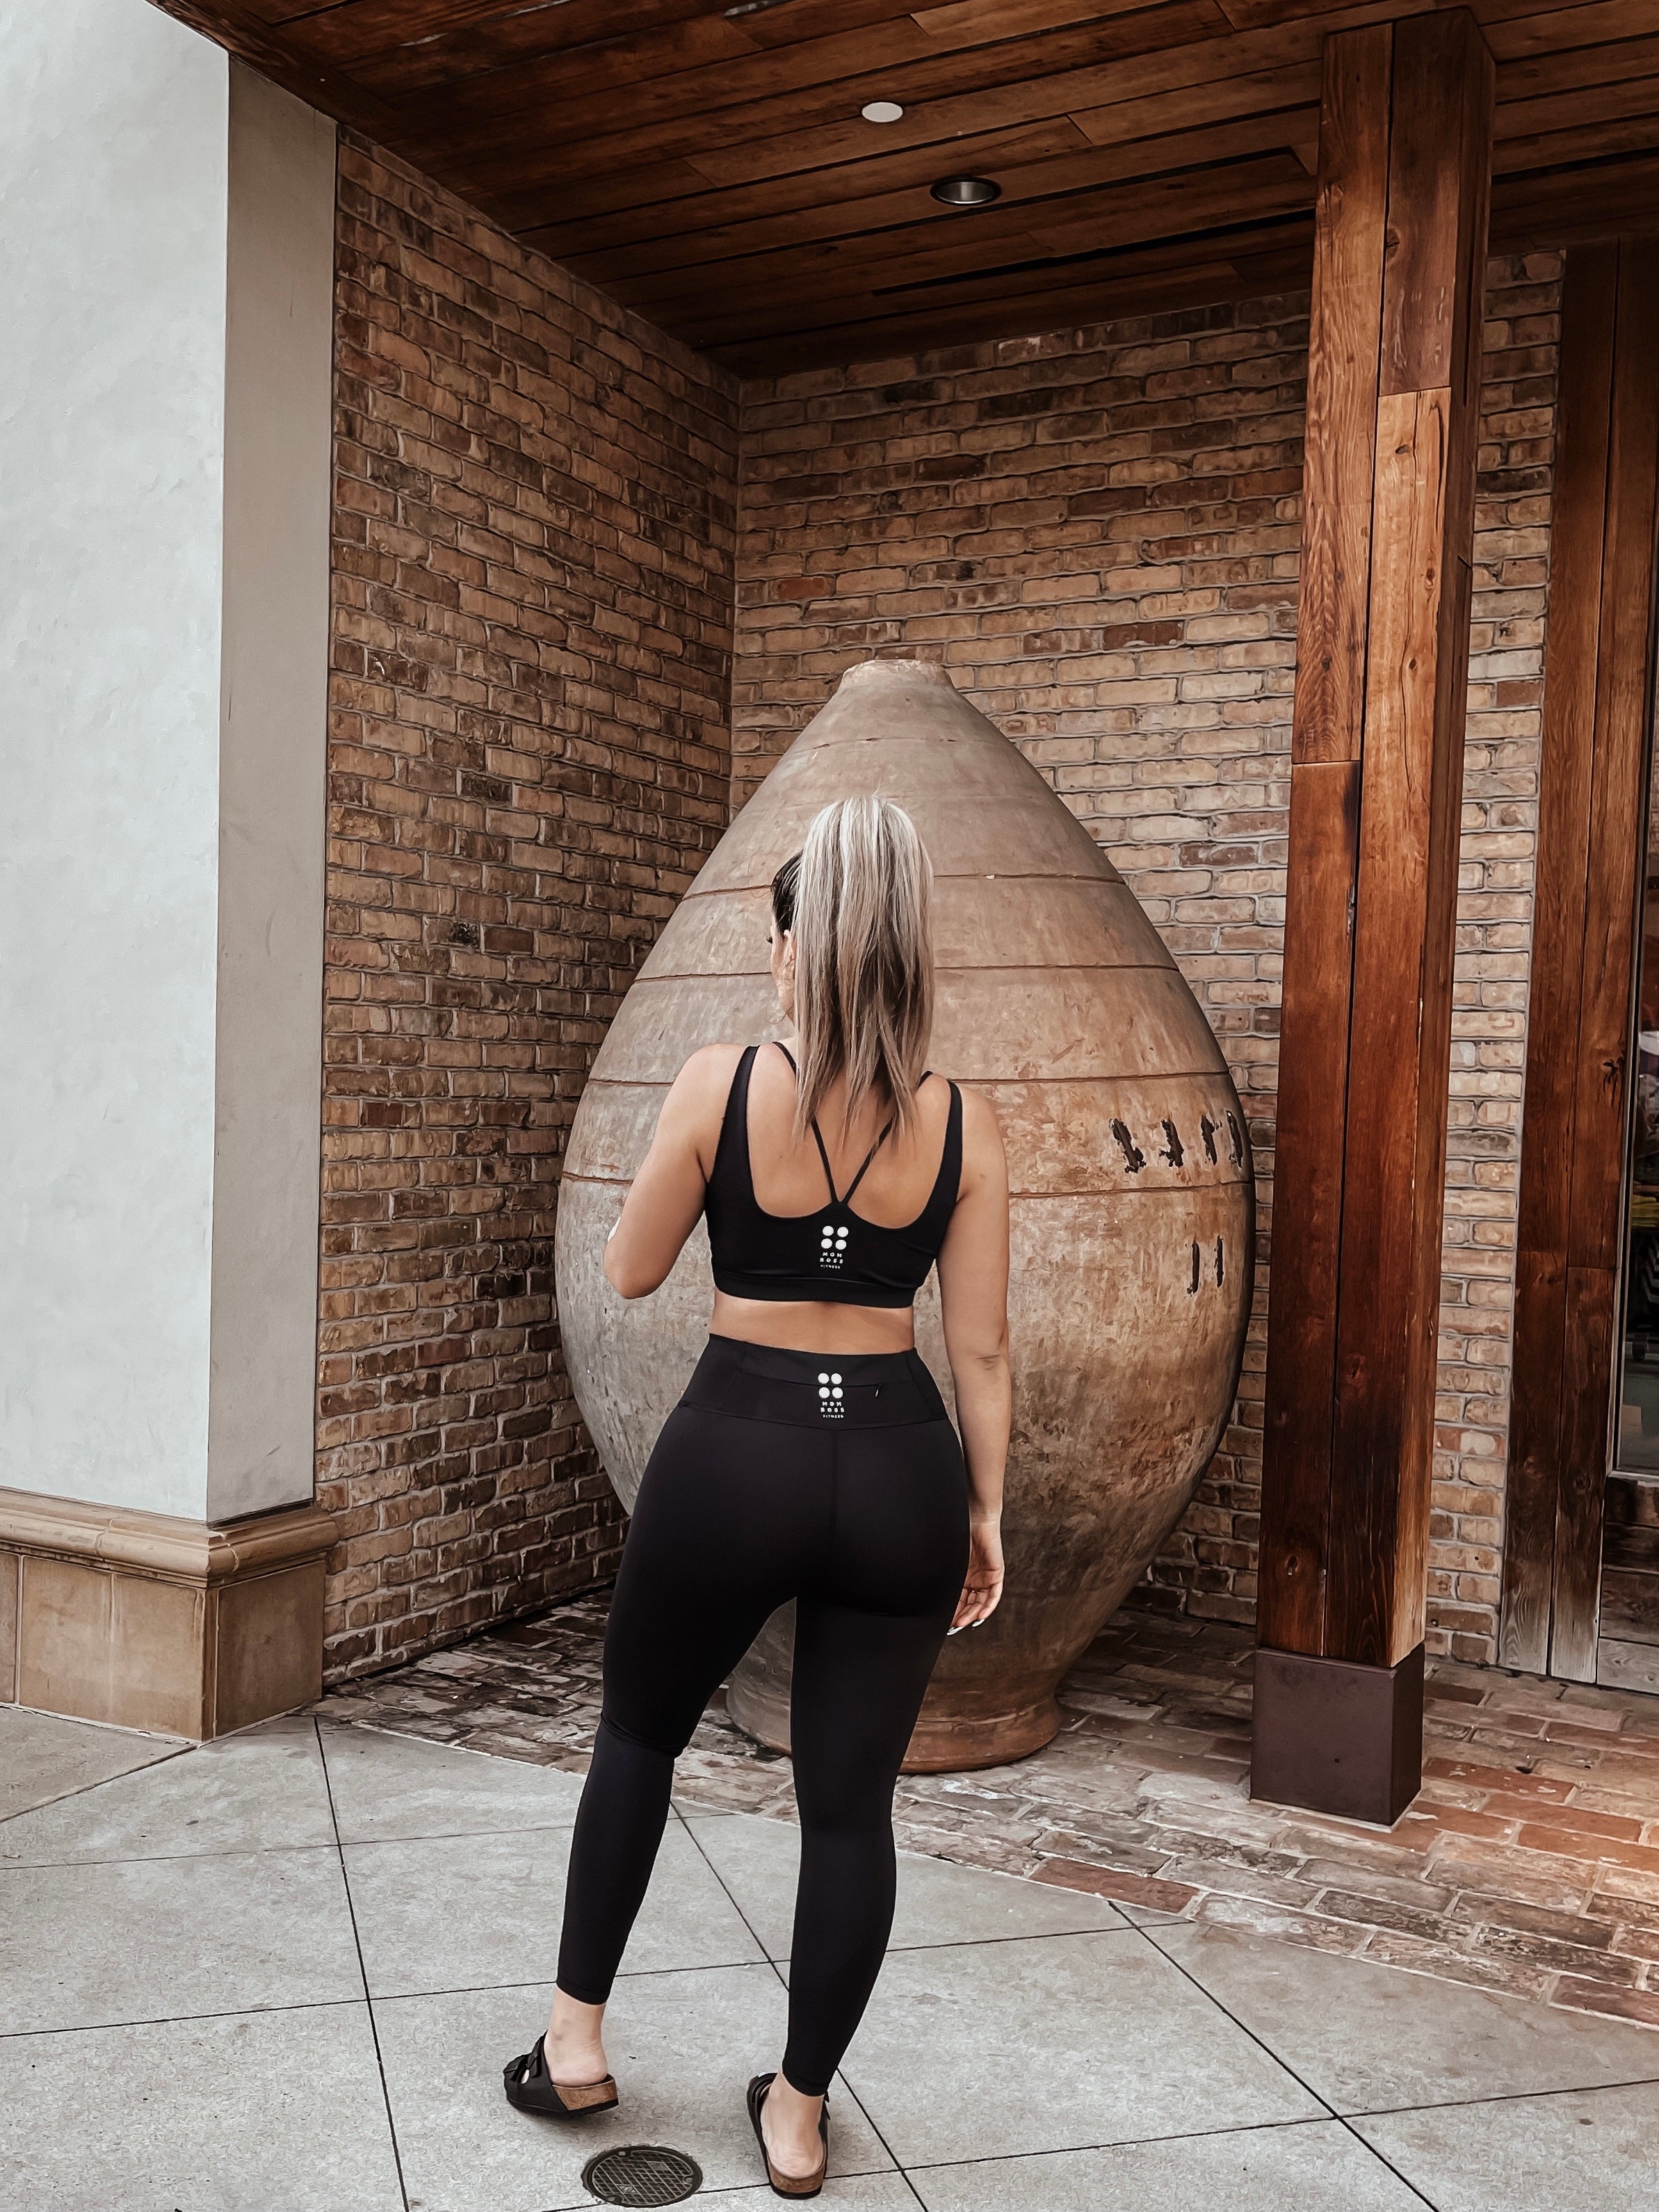 amanda mangels recommends sexy moms in yoga pants pic